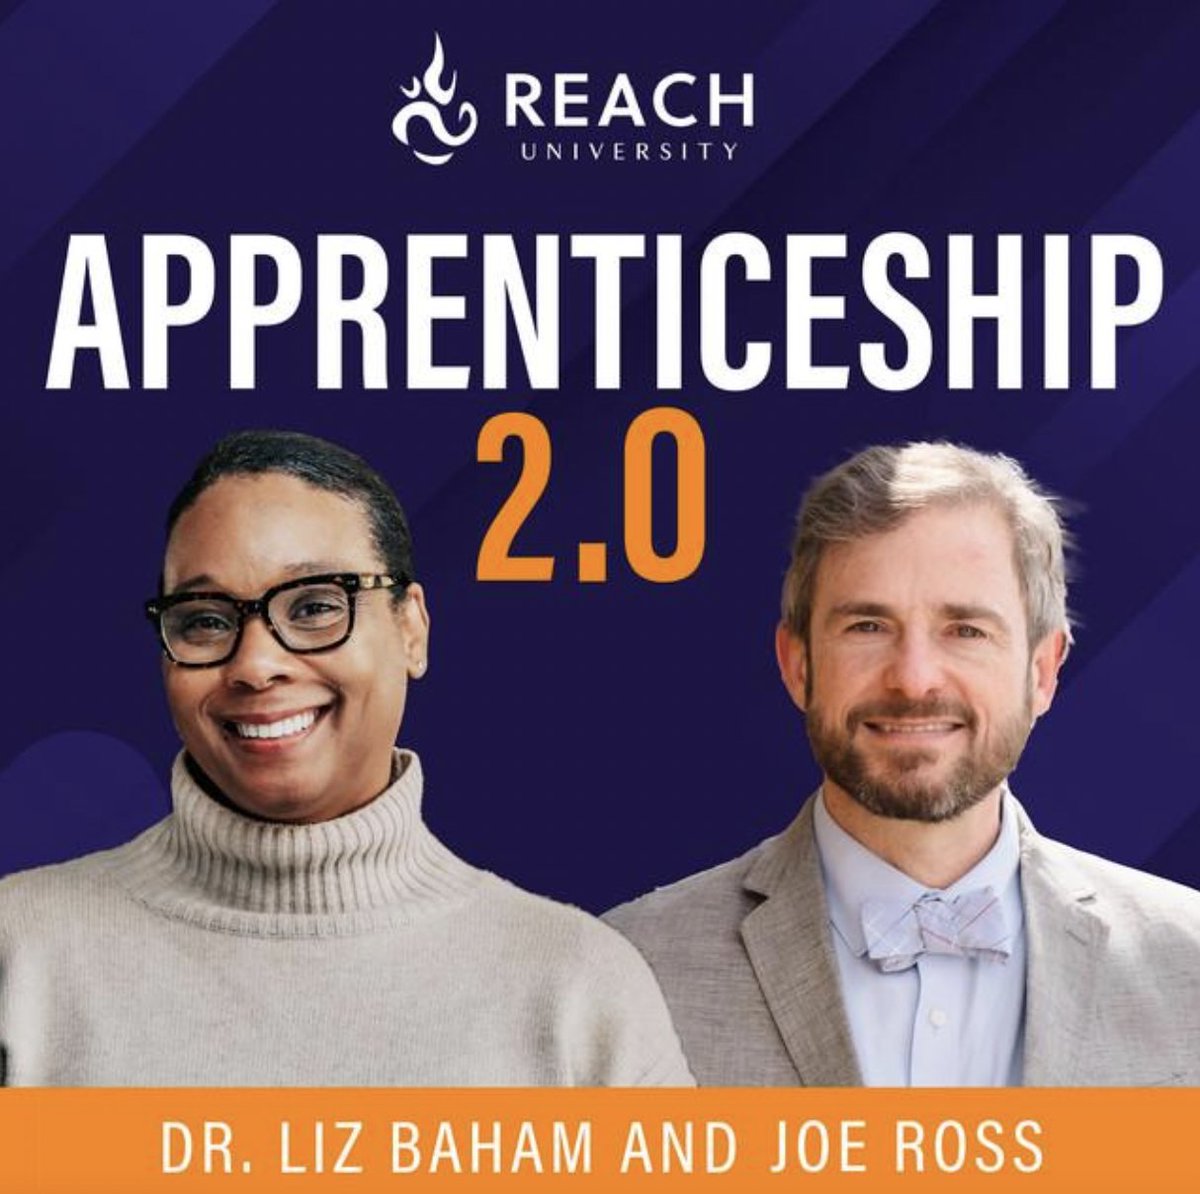 On a special episode of Apprenticeship 2.0, an all-star panel of leaders share how they are bringing meaningful change to life across apprenticeships, degrees, and workforce development. @ColoradoLabor @NewAmerica @citizenross #ApprenticeshipDegrees podcasts.apple.com/us/podcast/bon…